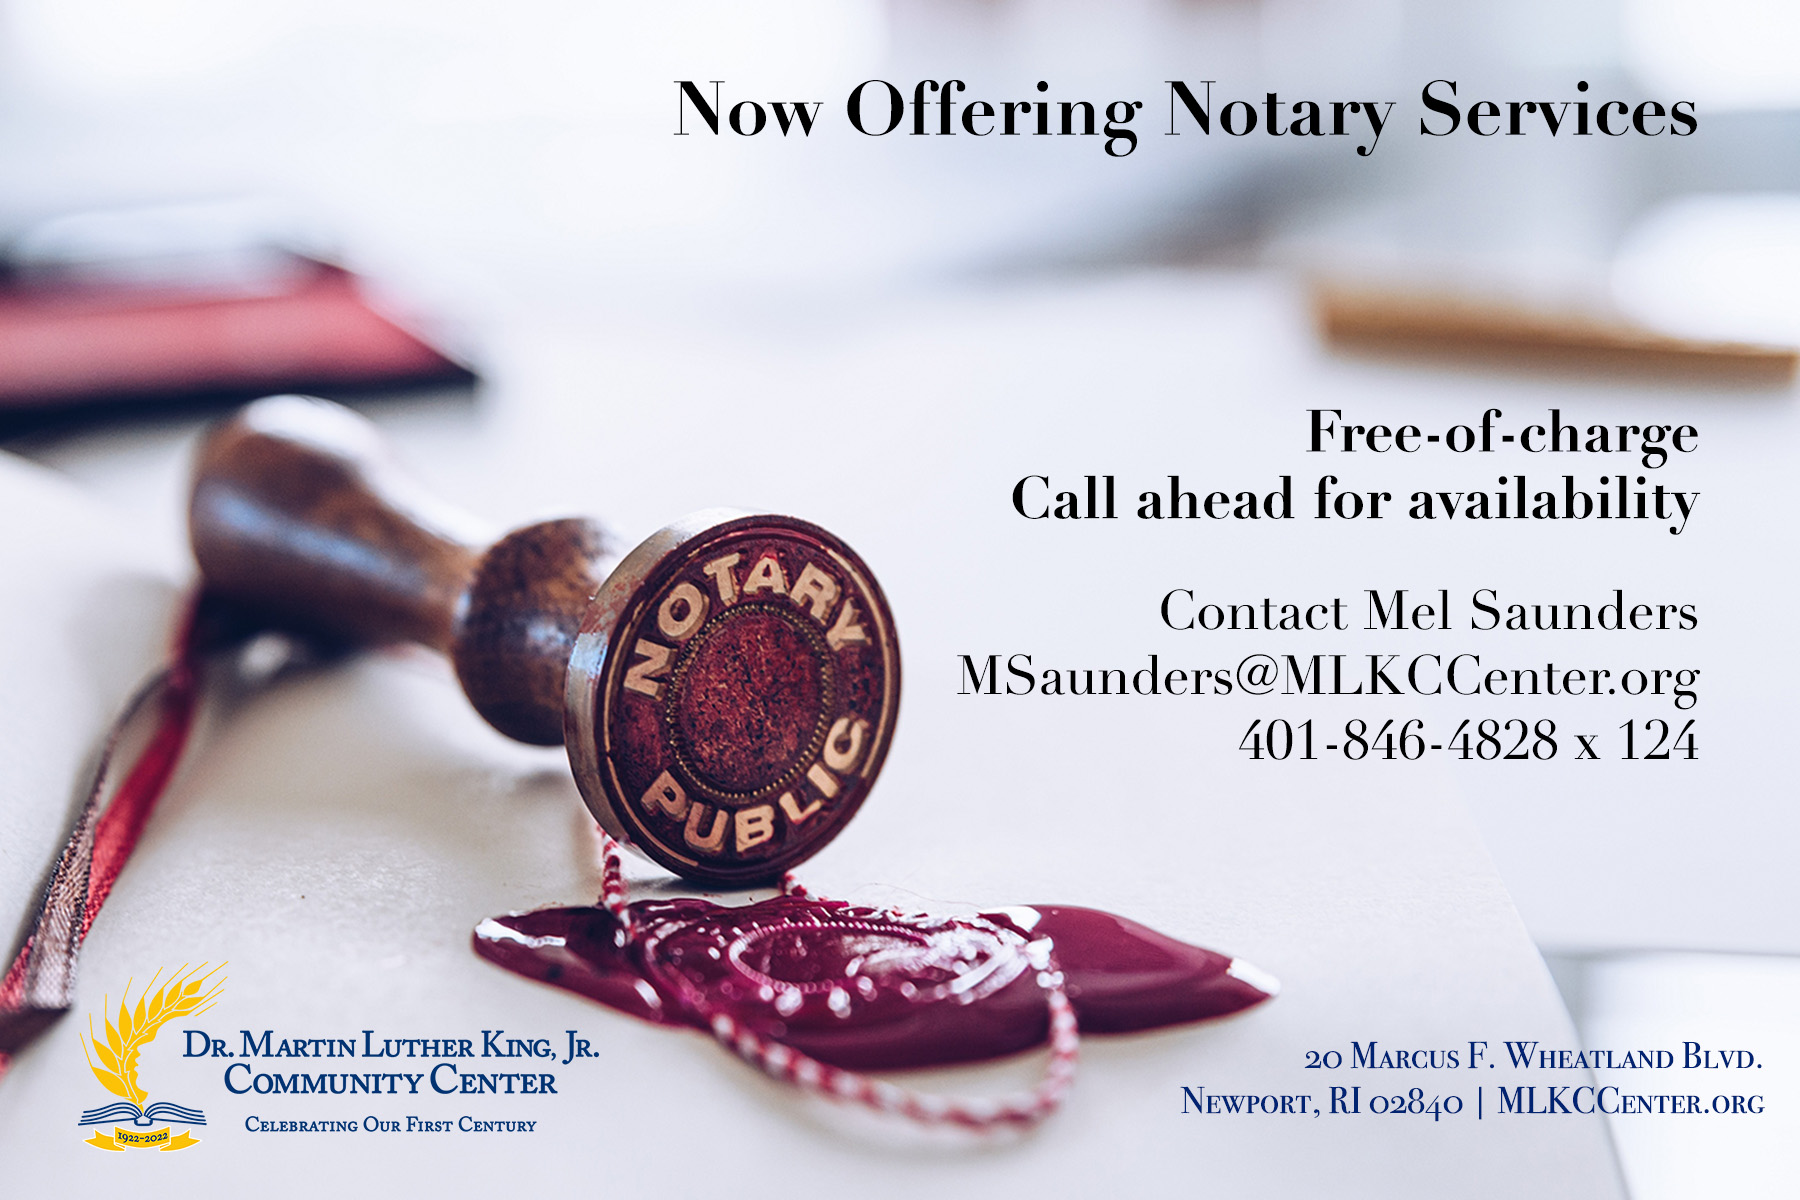 10/21/22 Now Offering Notary Services